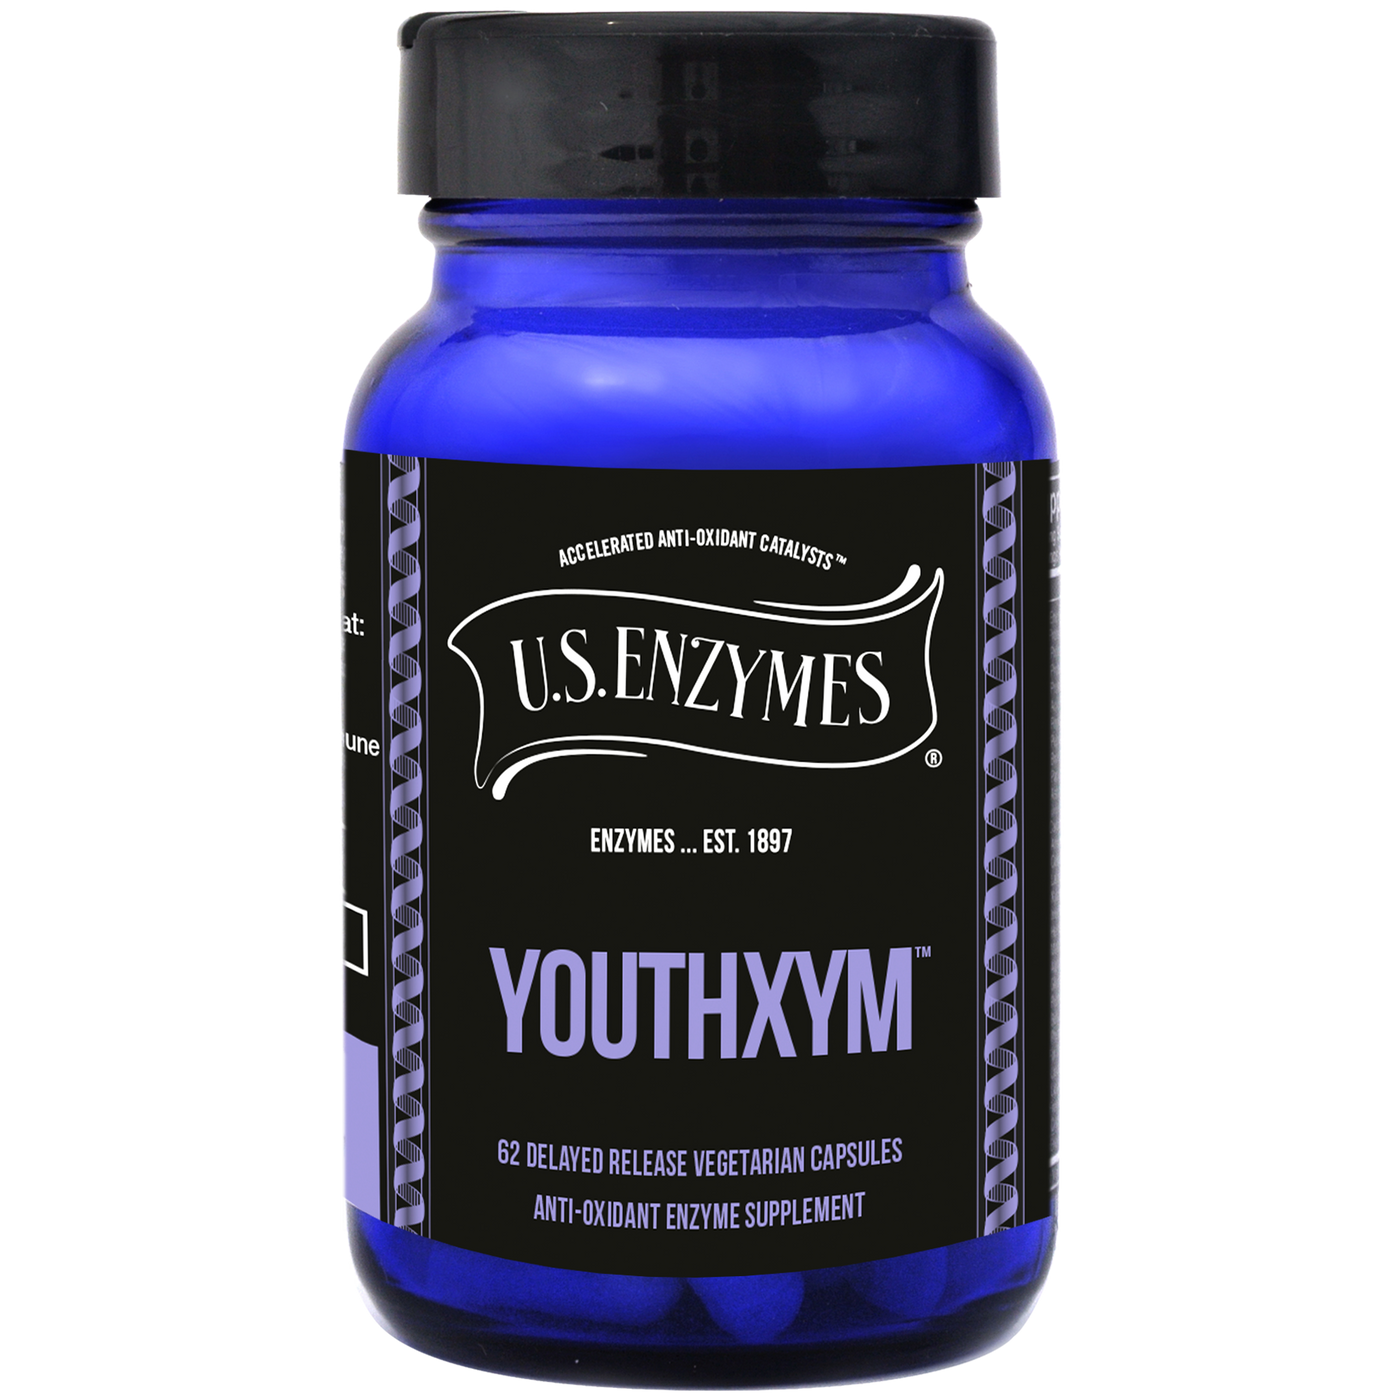 Youthxym Delayed Release 62 veg caps Curated Wellness